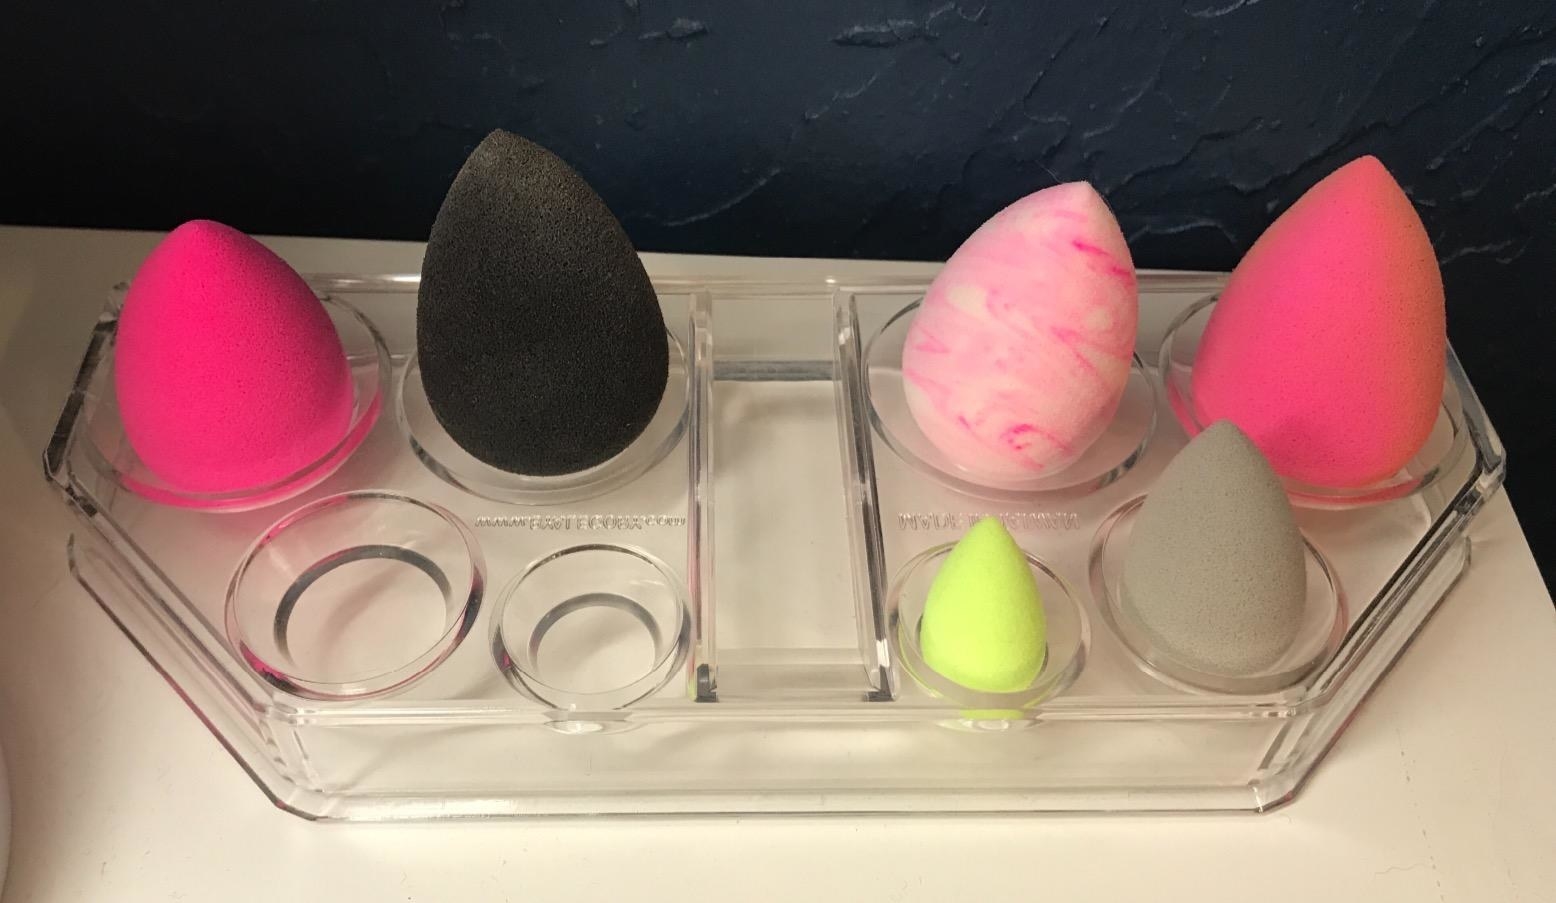 The clear organizer with different size slots holding makeup sponges in different sizes